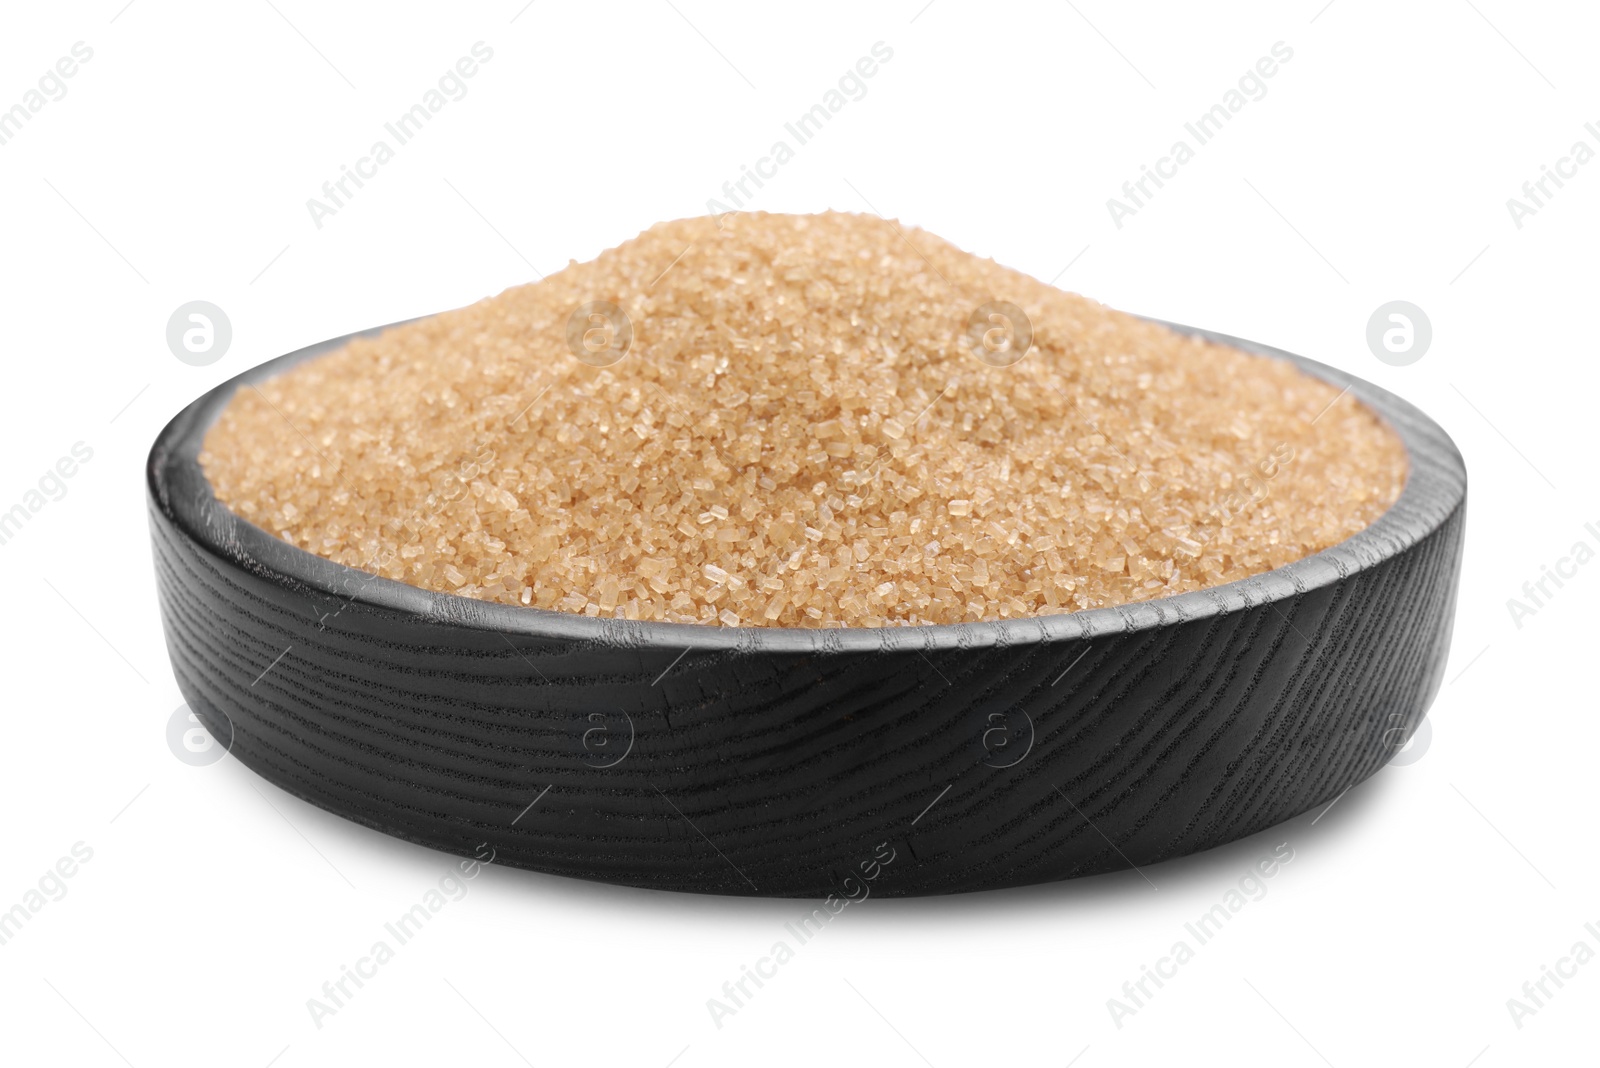 Photo of Black wooden plate with brown sugar isolated on white